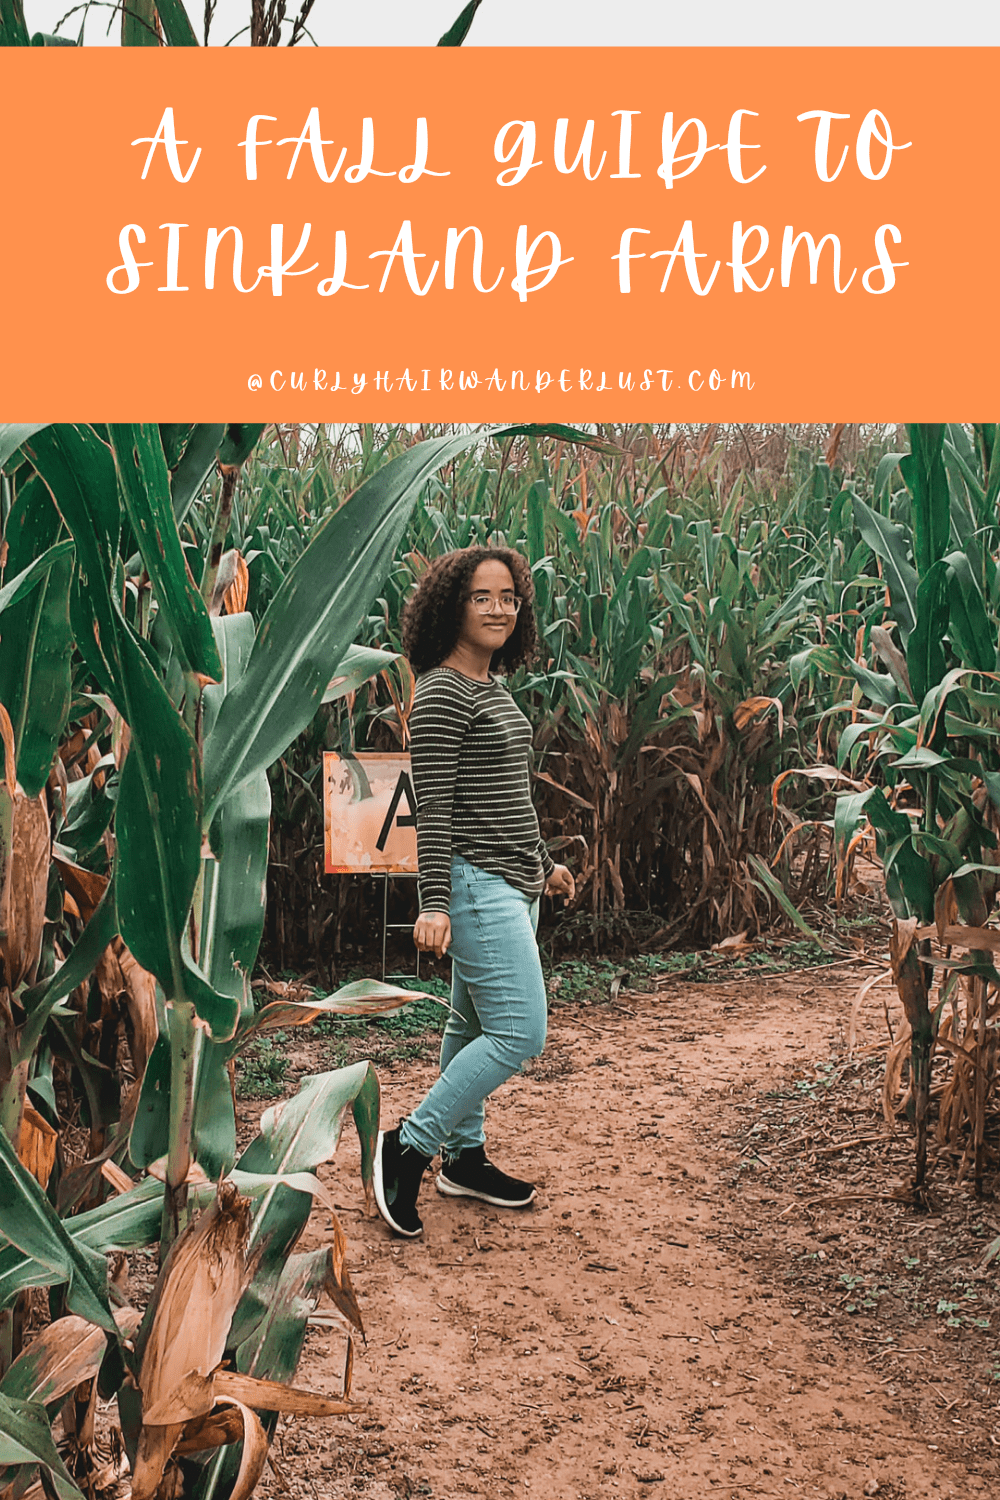 Fall guide to sinkland farms 